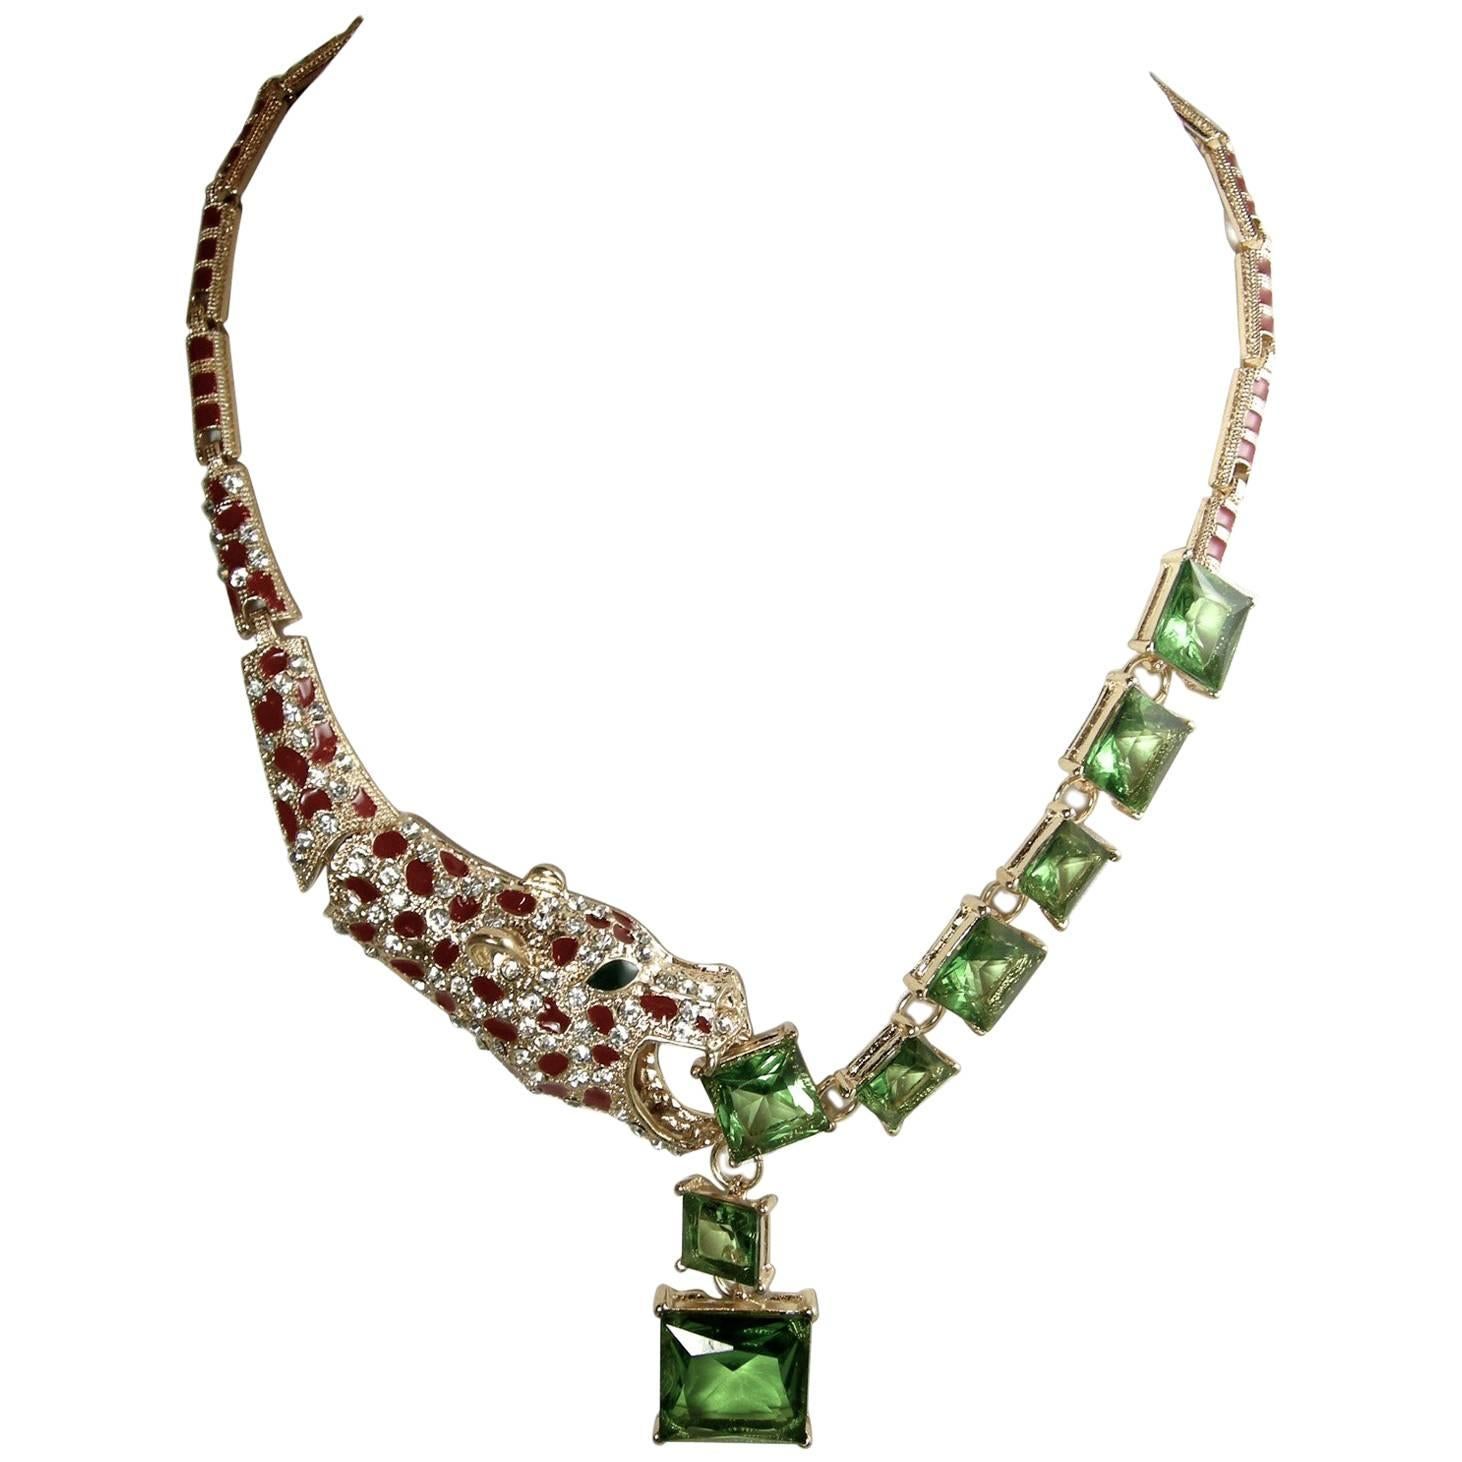 Unusual Leopard Necklace With Green Crystals Necklace